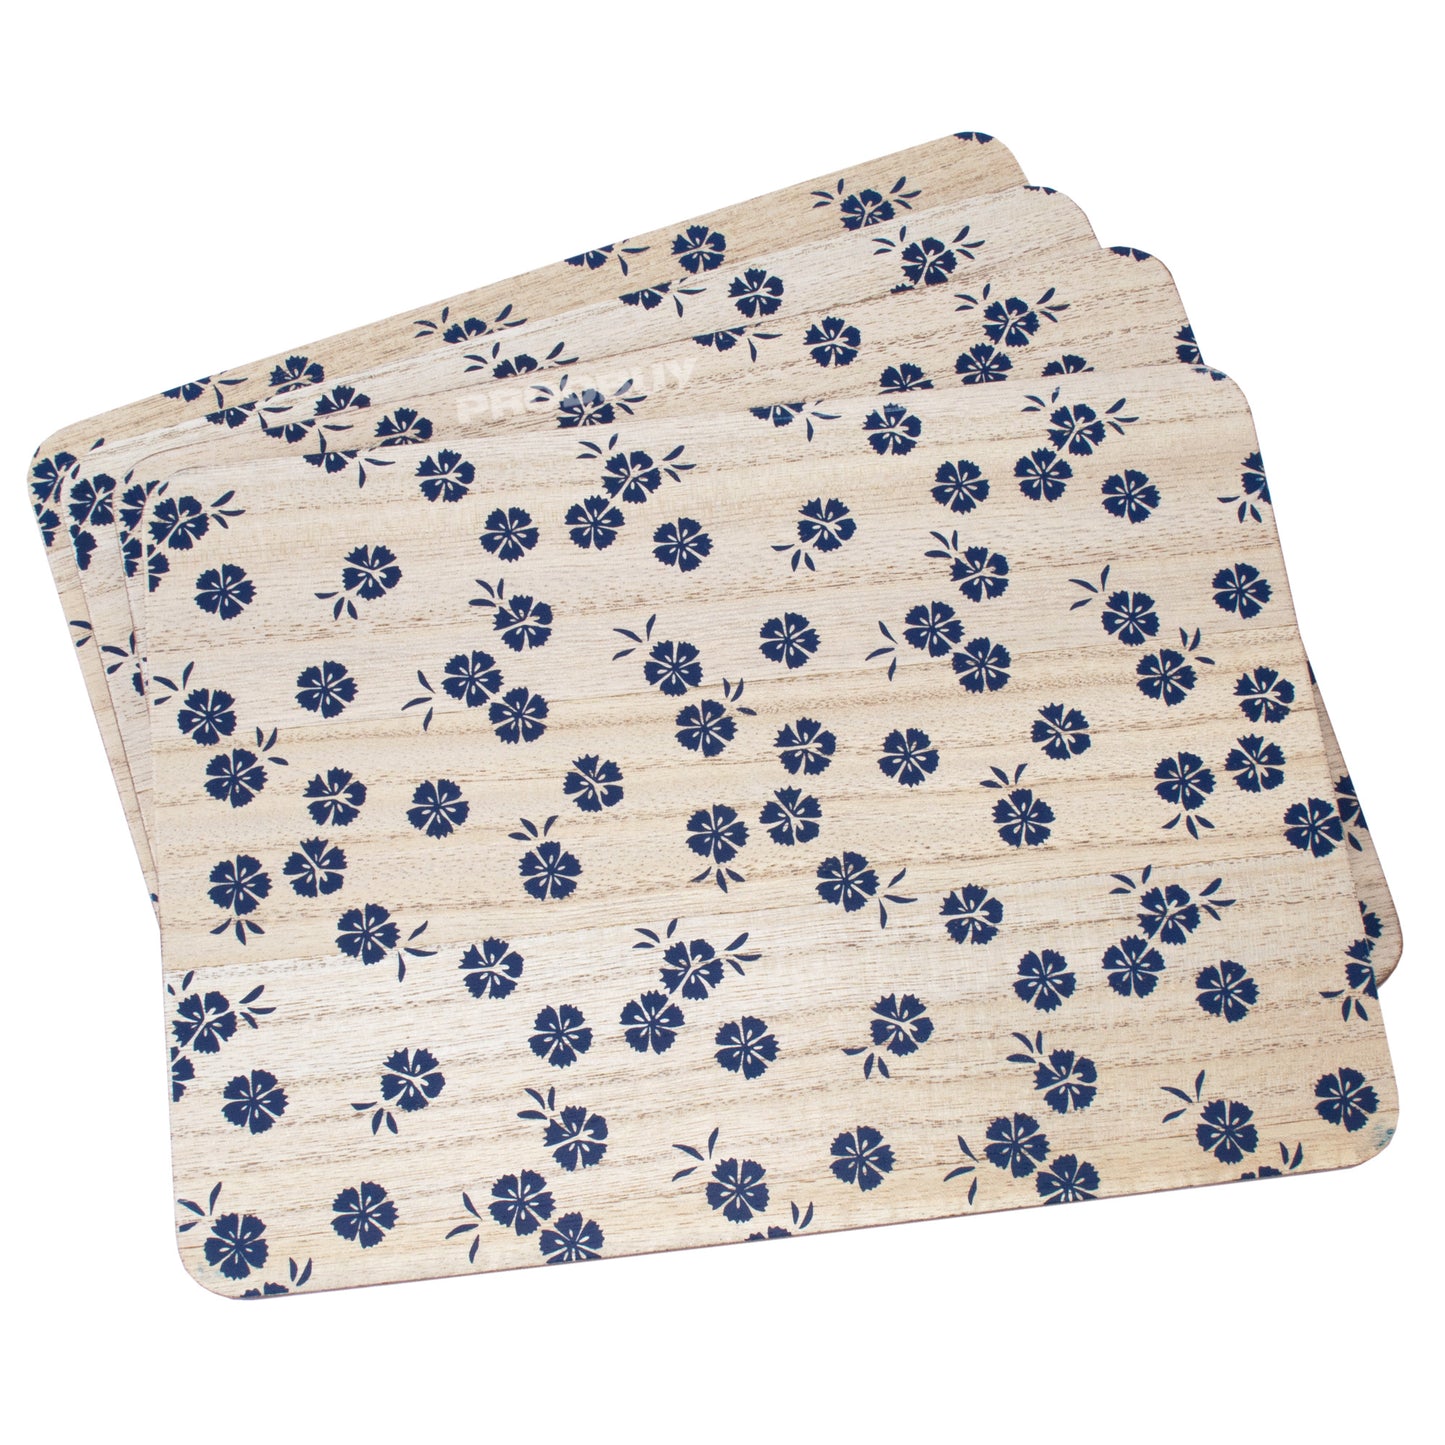 Pack of 4 Wooden Placemats with Blue Flowers Print